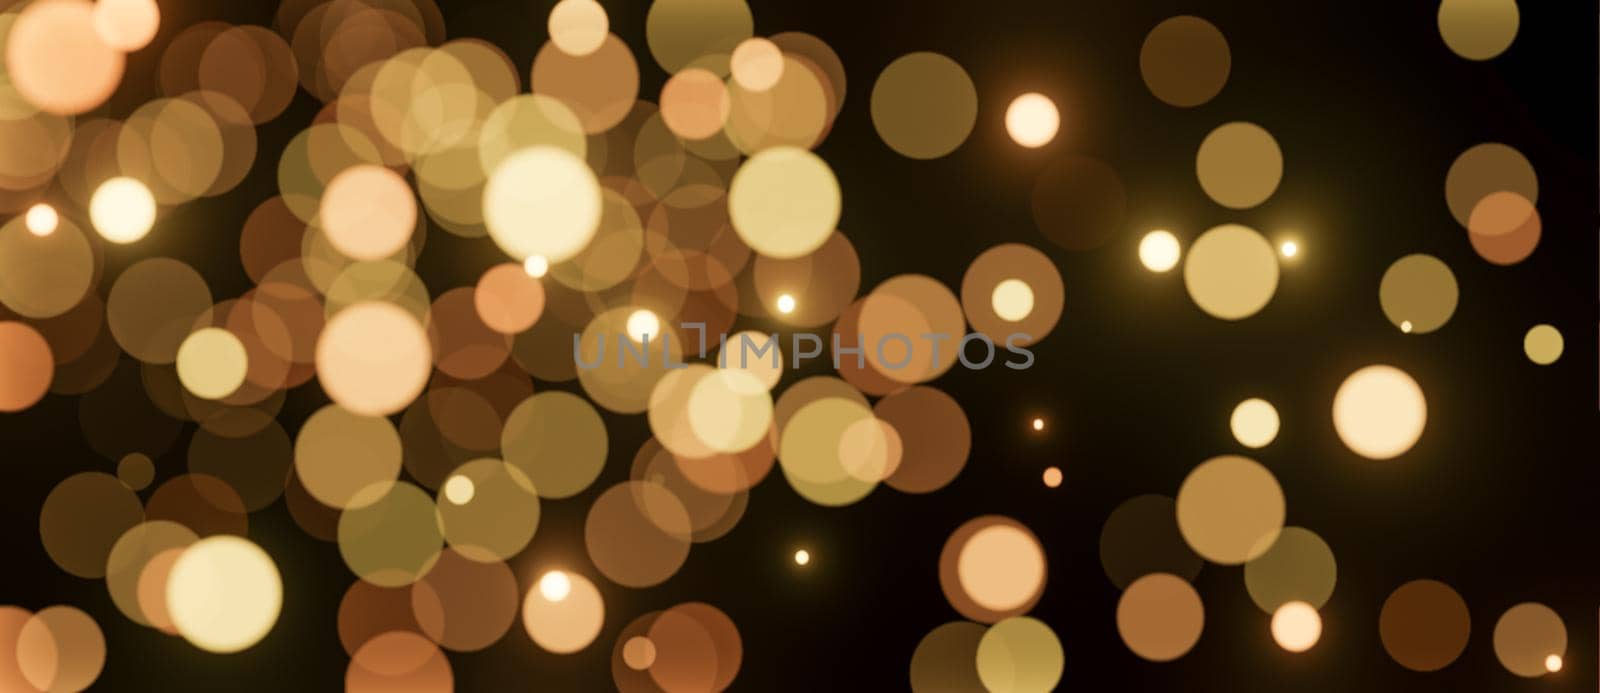 background of light spots with warm color bokeh effect. 3d illustration